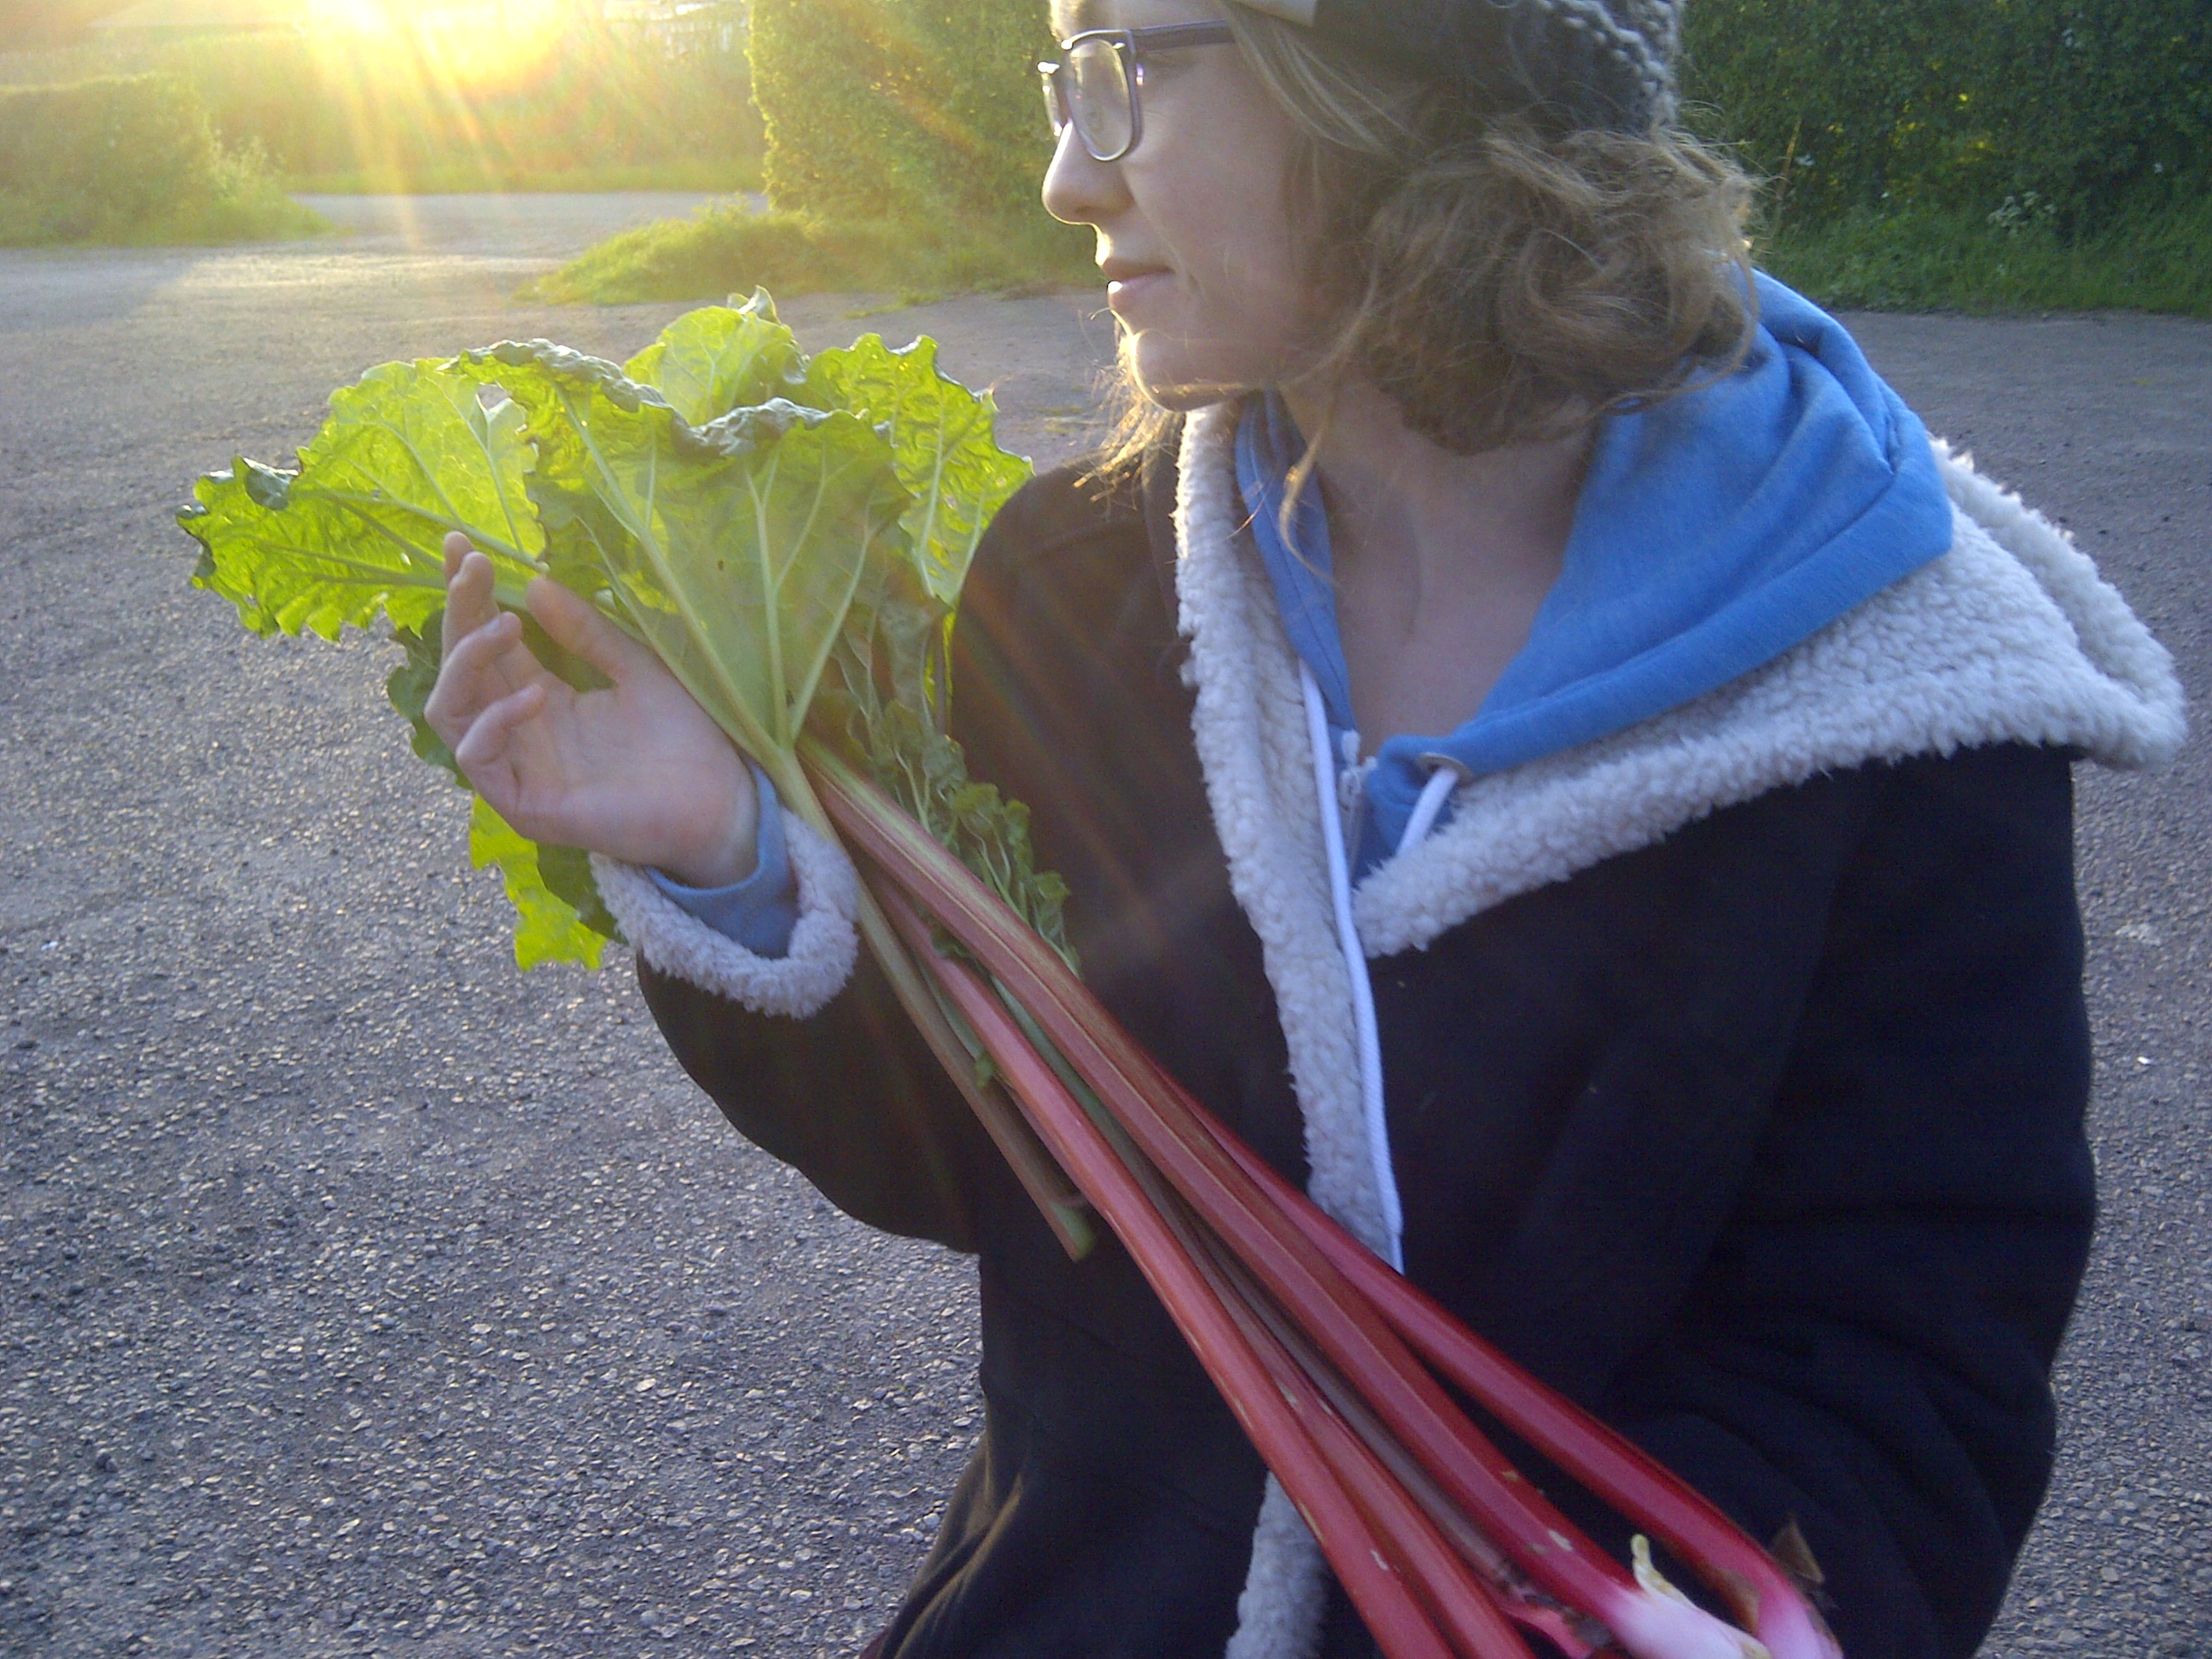 Lucy and the rhubarb